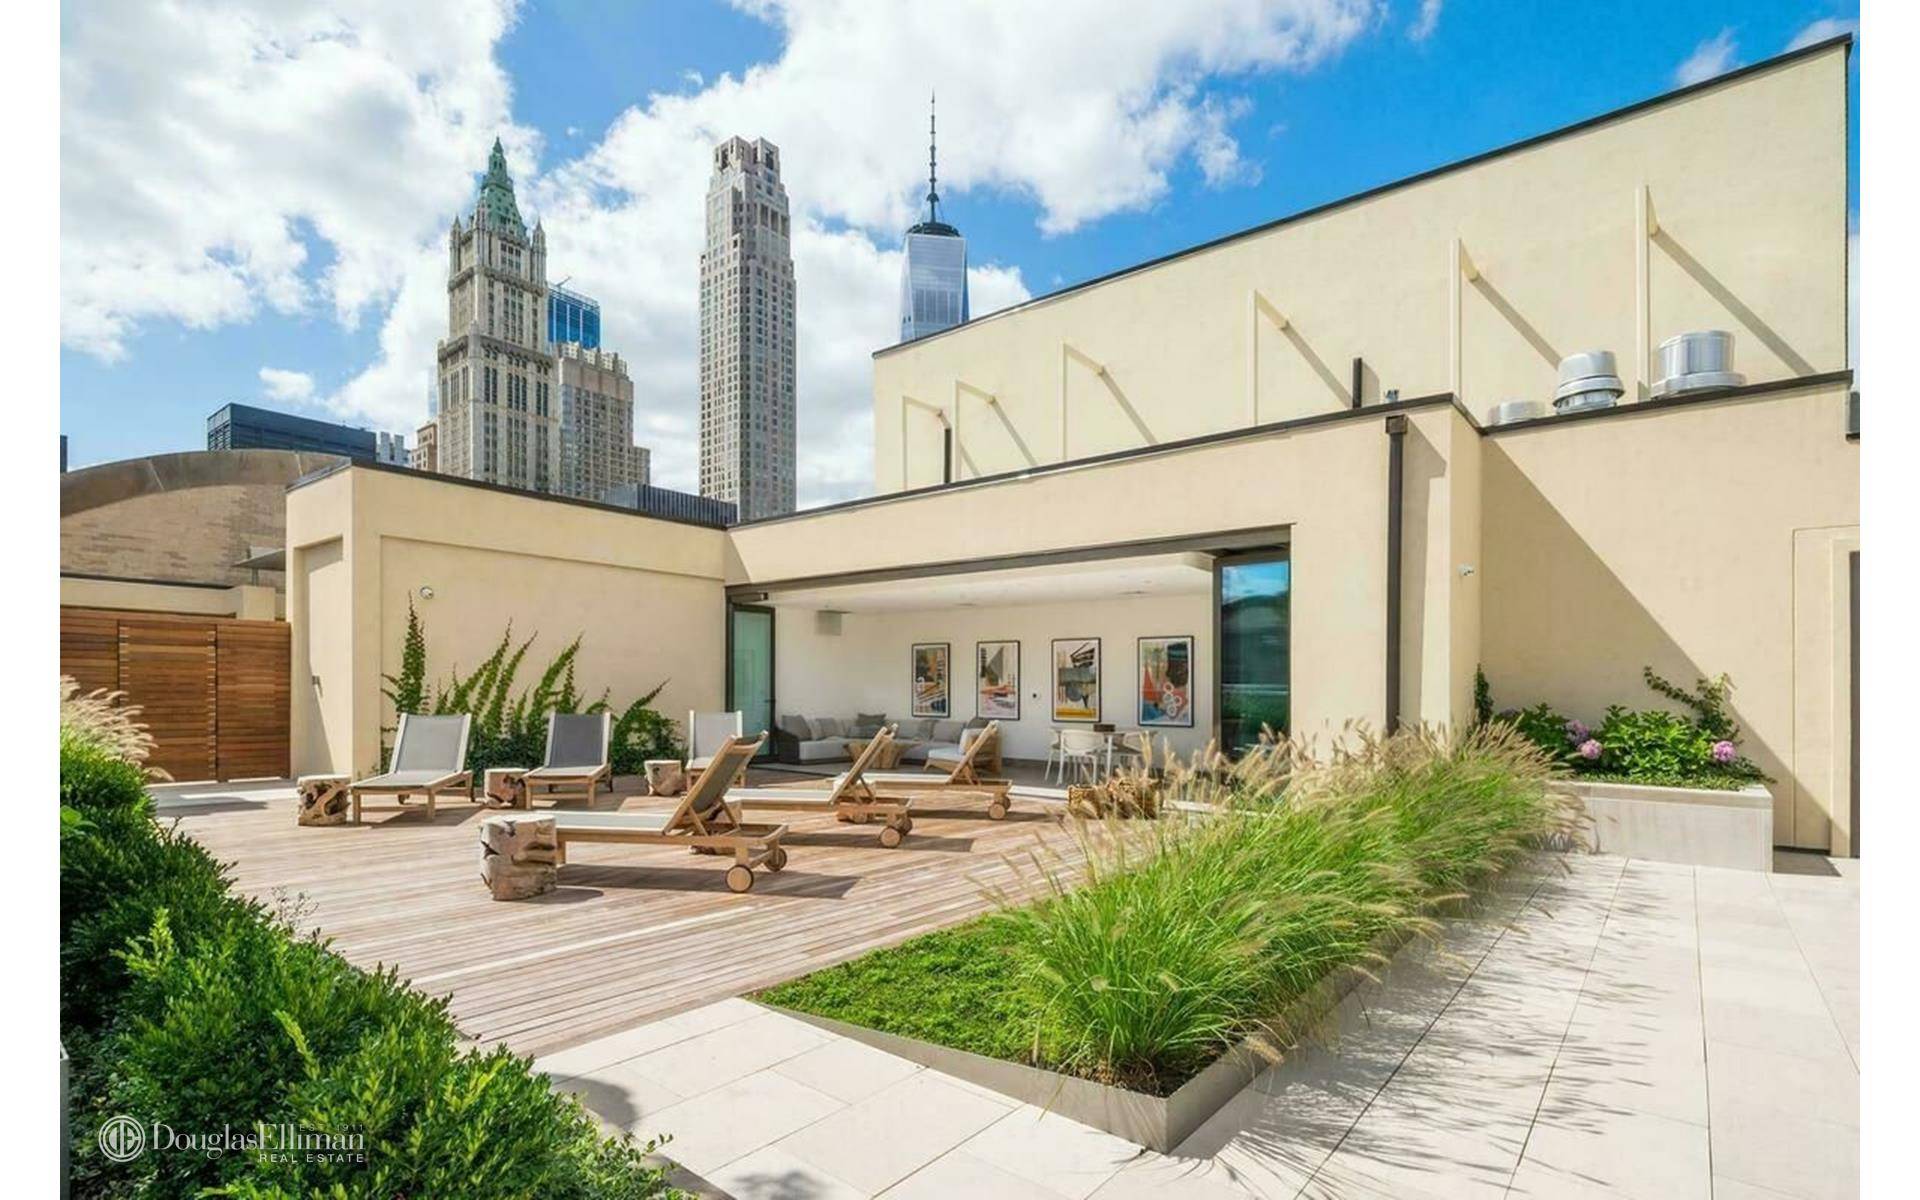 This 2, 236 SF Convertable 3 bedroom, two and a half bath residence designed by Gabellini Sheppard is housed within one of Manhattan's finest Beaux Arts landmark buildings.